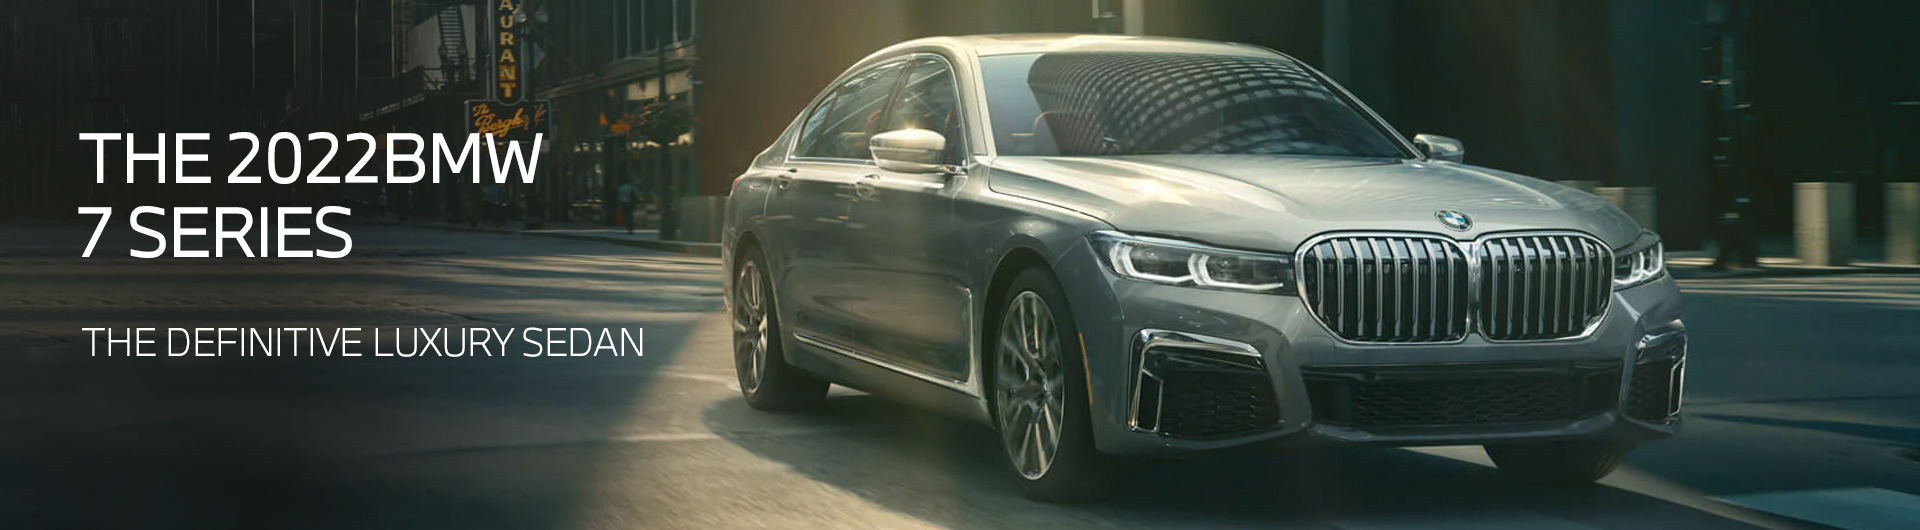 The 2022 BMW 7 Series